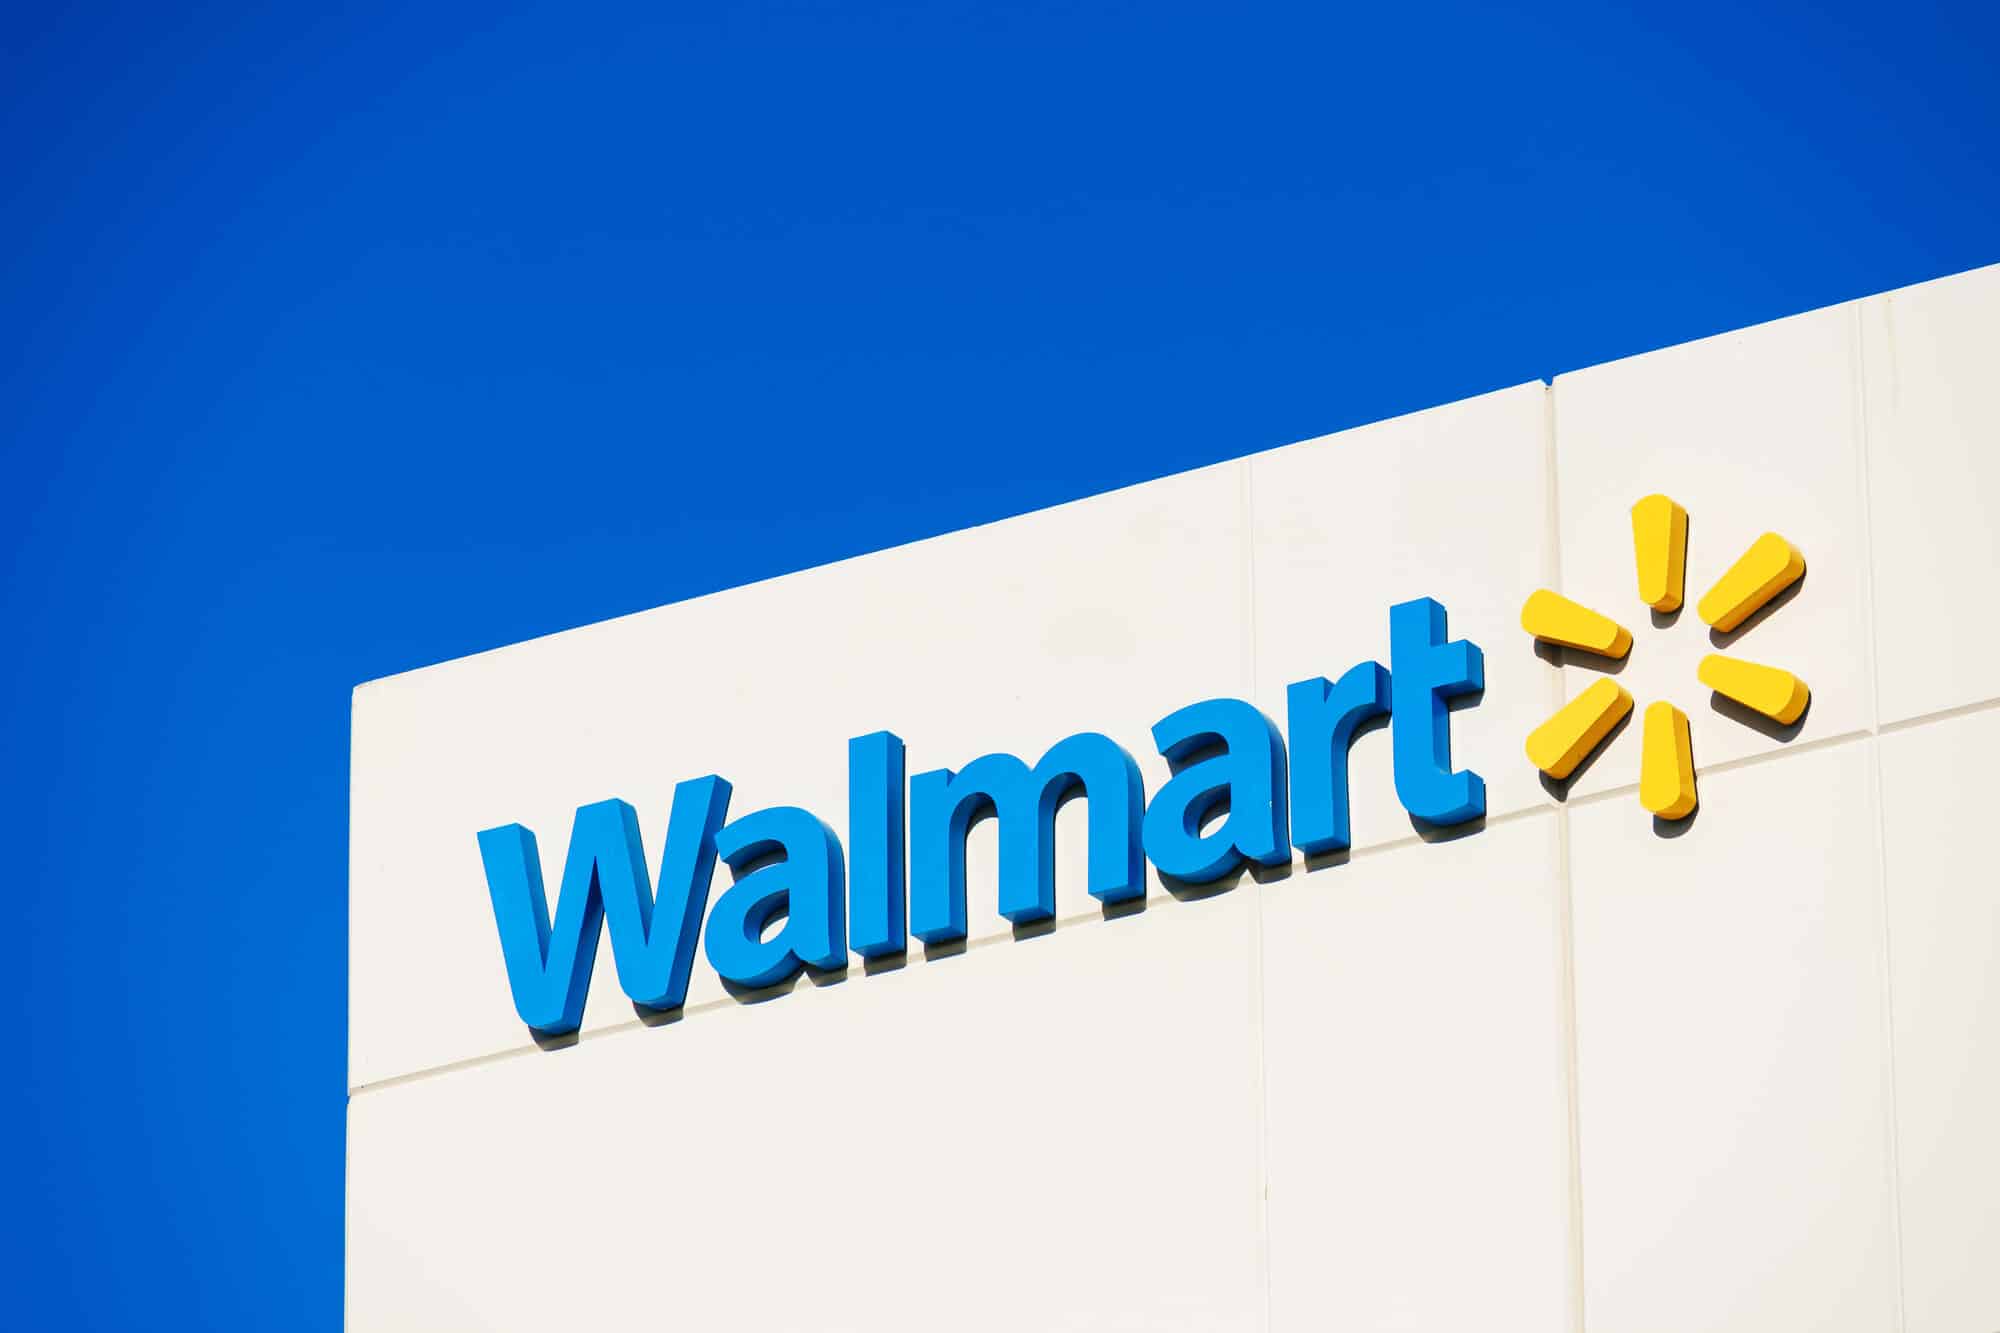 Guide to Working at Walmart - Forage